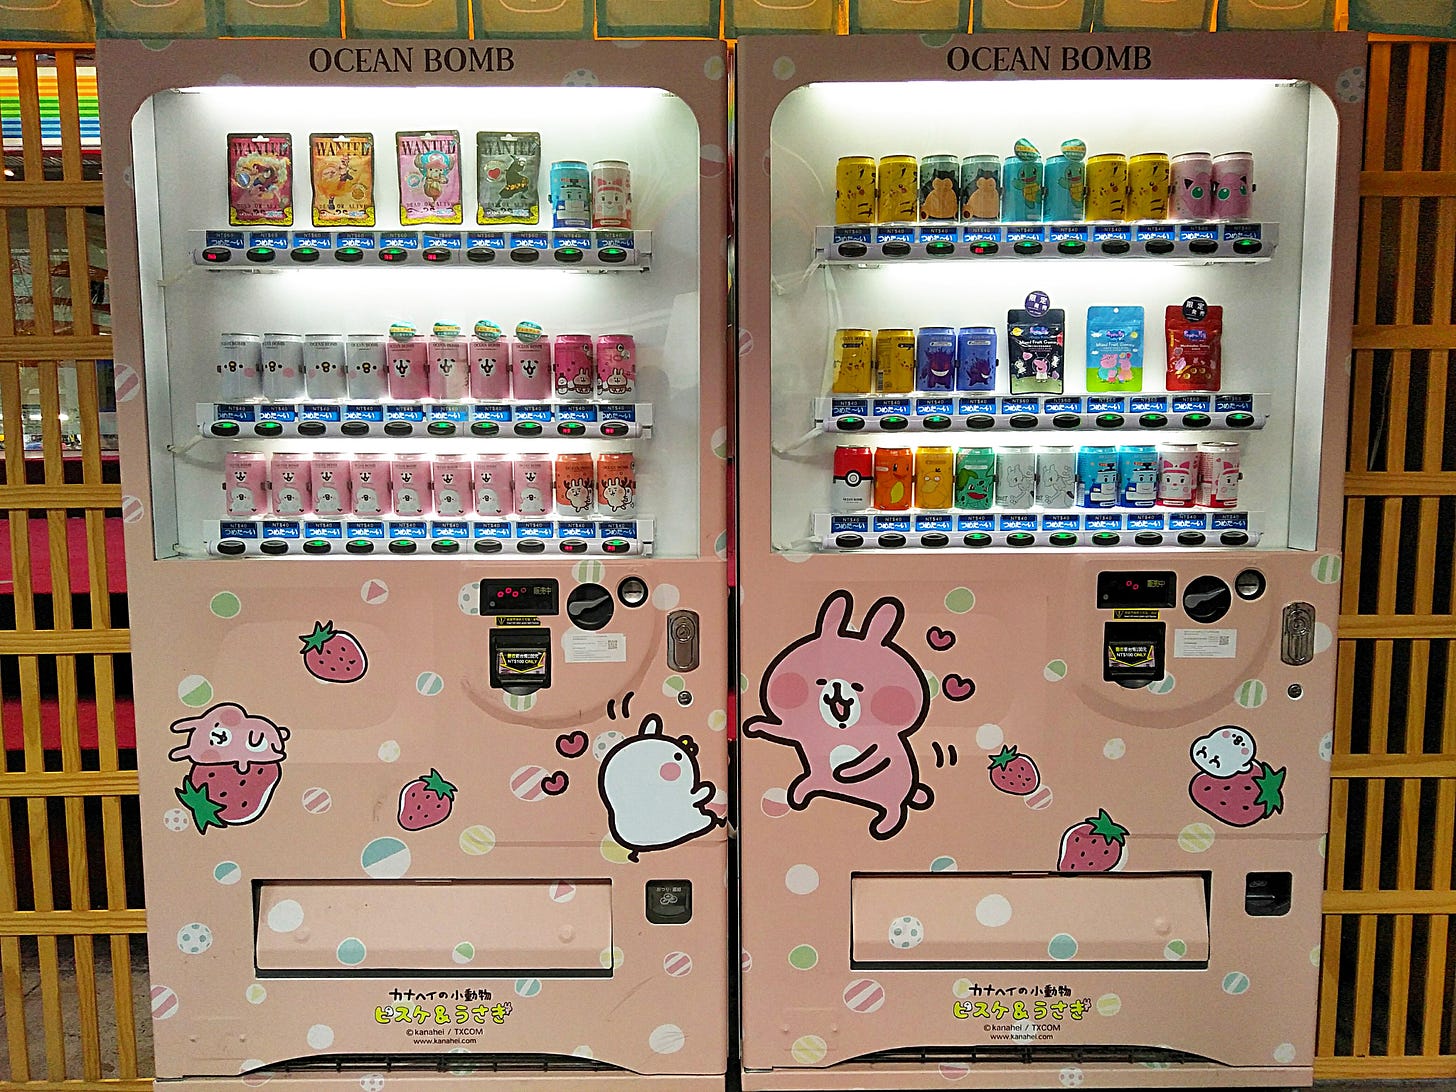 Two Japanese-style vending machines side by side decorated with animated characters and strawberries.